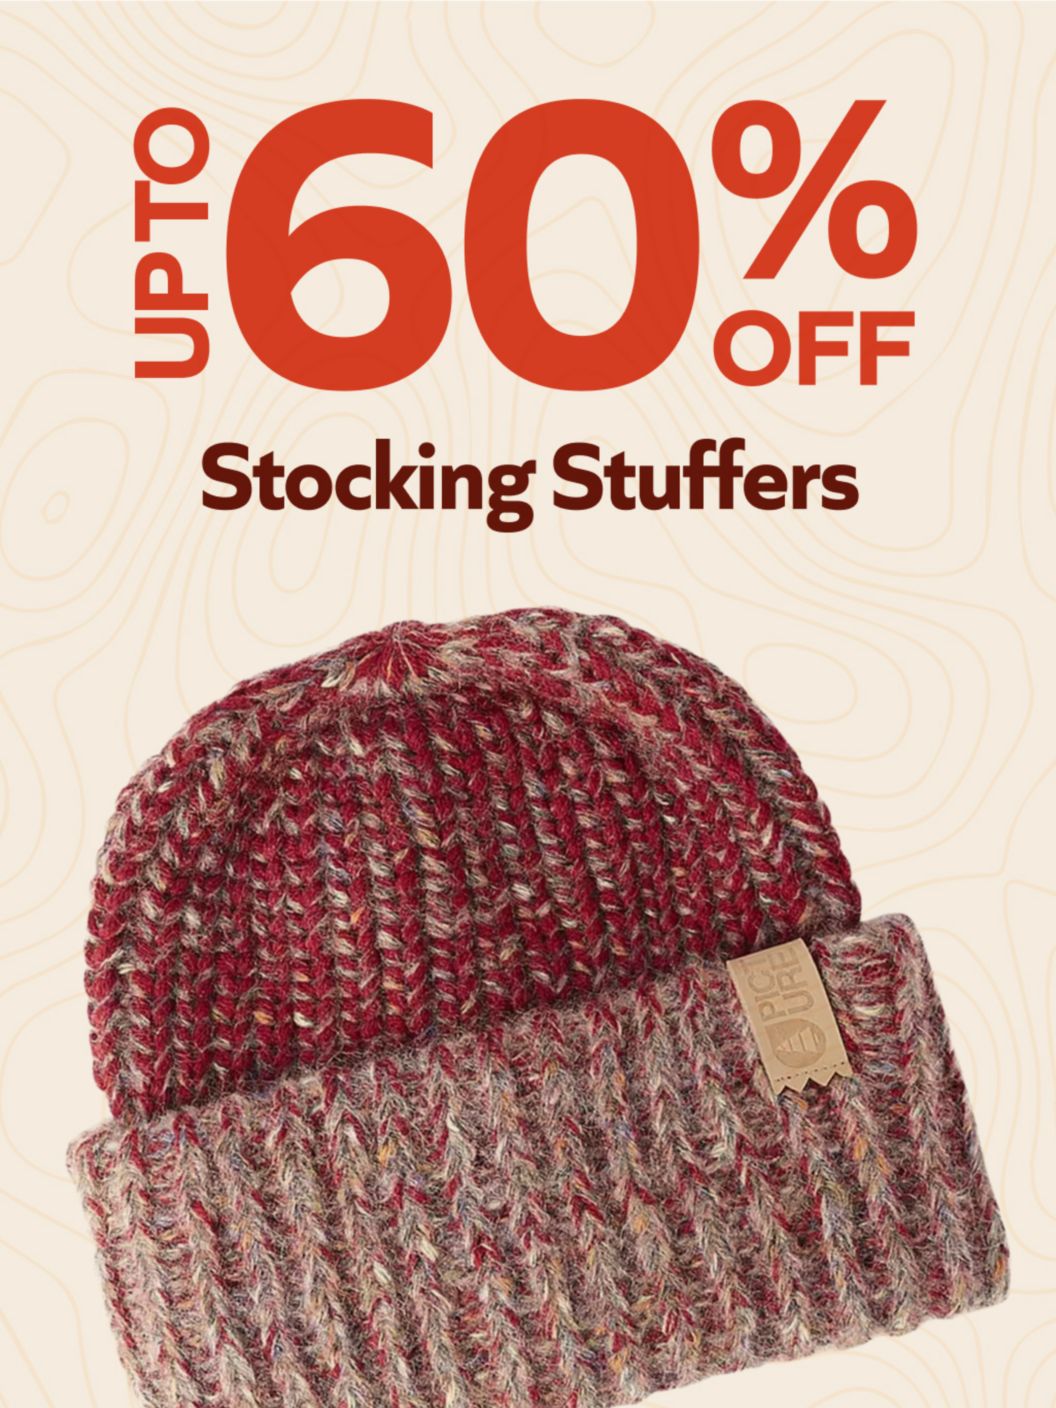 Up To 60% Off Stocking Stuffers 